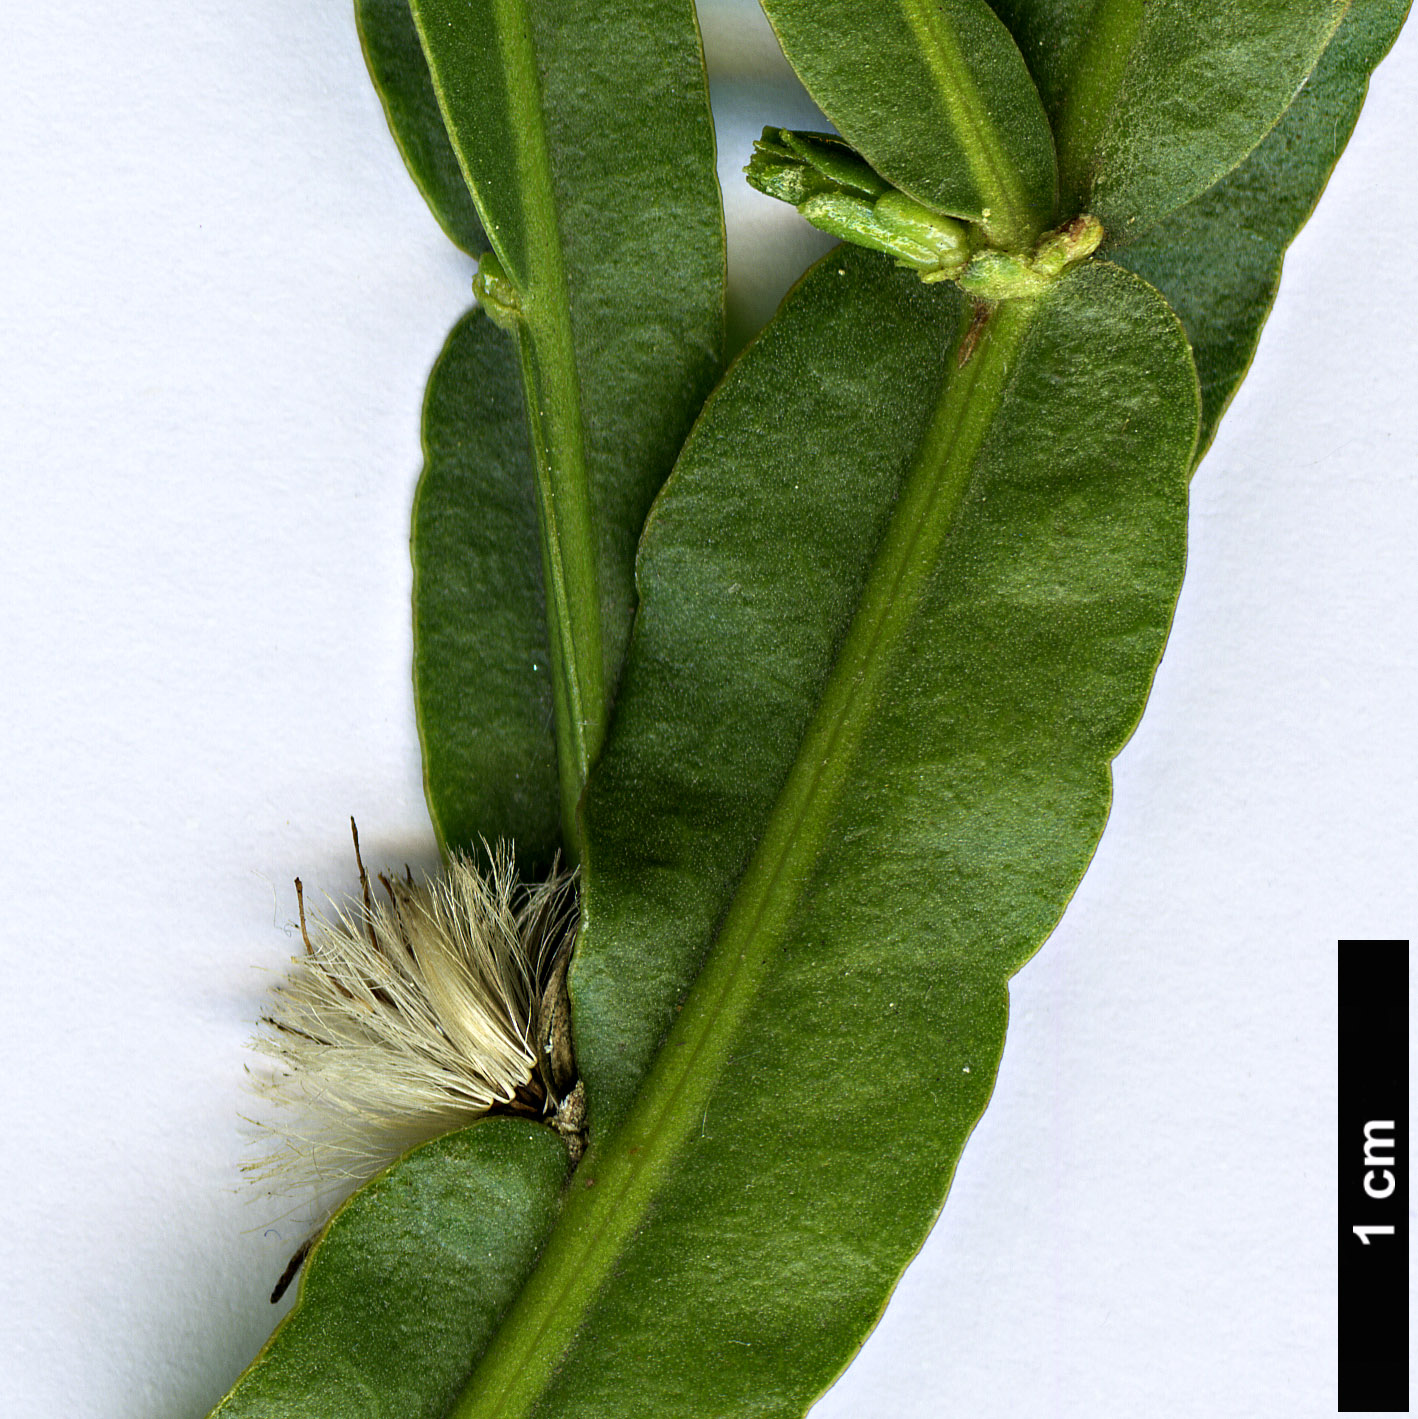 High resolution image: Family: Asteraceae - Genus: Baccharis - Taxon: genistelloides